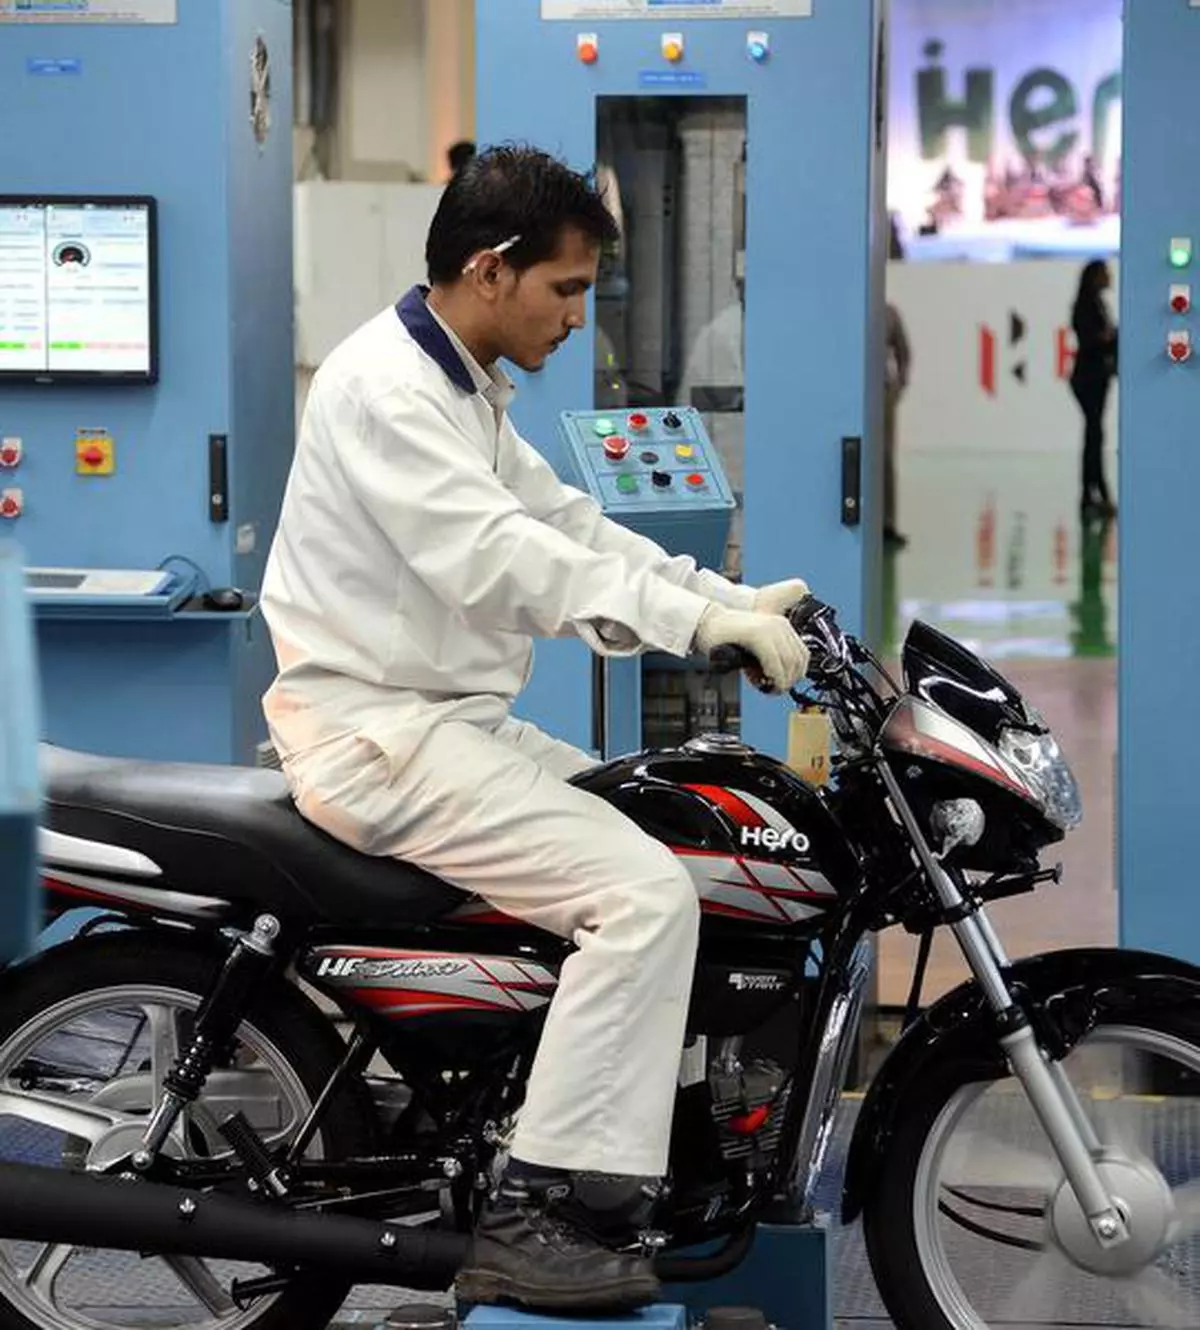 On Sunday, Hero MotoCorp reported a 13.5 per cent rise in sales to over 6.5 lakh units in May over the previous month